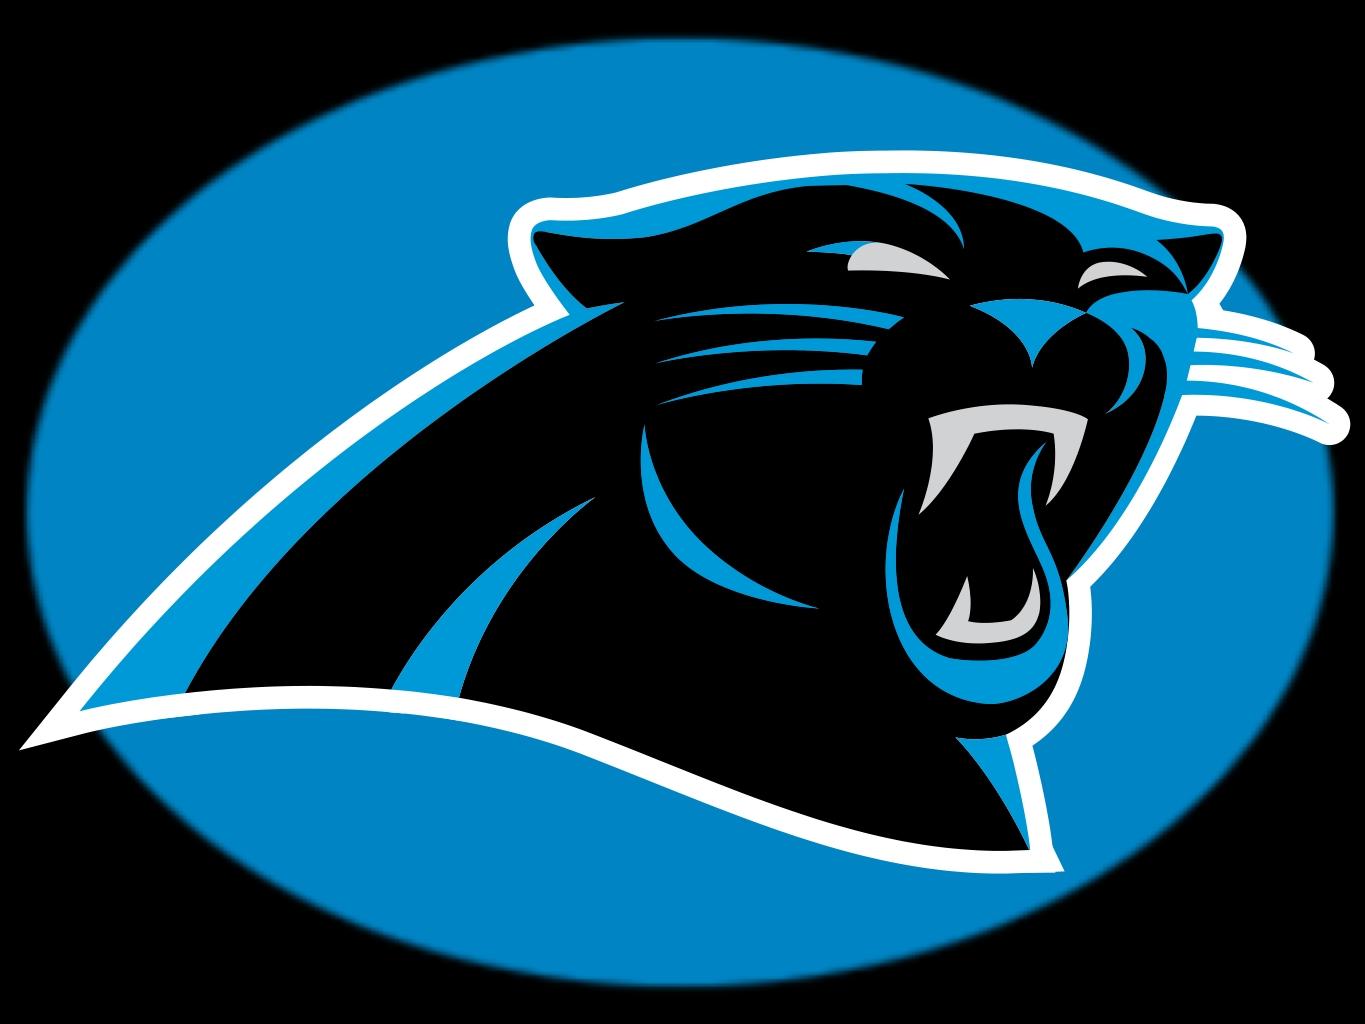 NFL Panthers Logo - Despite Concussion Worry, Carolina Panthers Remain Untouched | WUNC